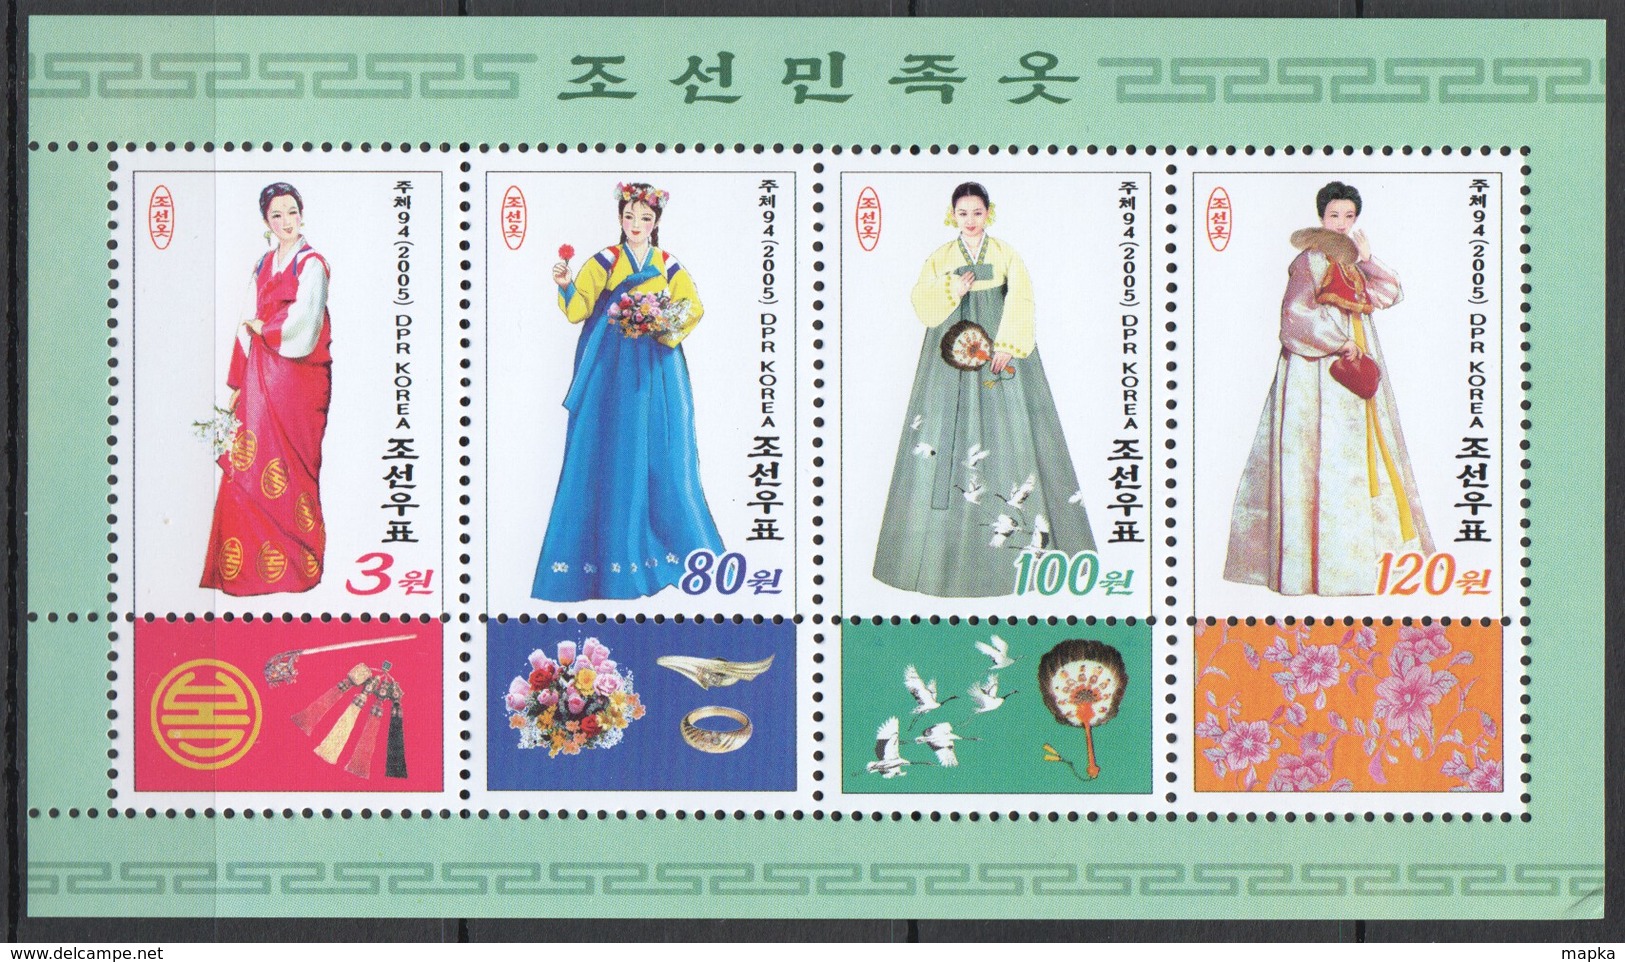 B393 2005 KOREA ART CULTURE TRADITIONAL CLOTHES COSTUMES 1KB MNH SLIGHTLY CREASED LOWER RIGHT CORNER - Costumes